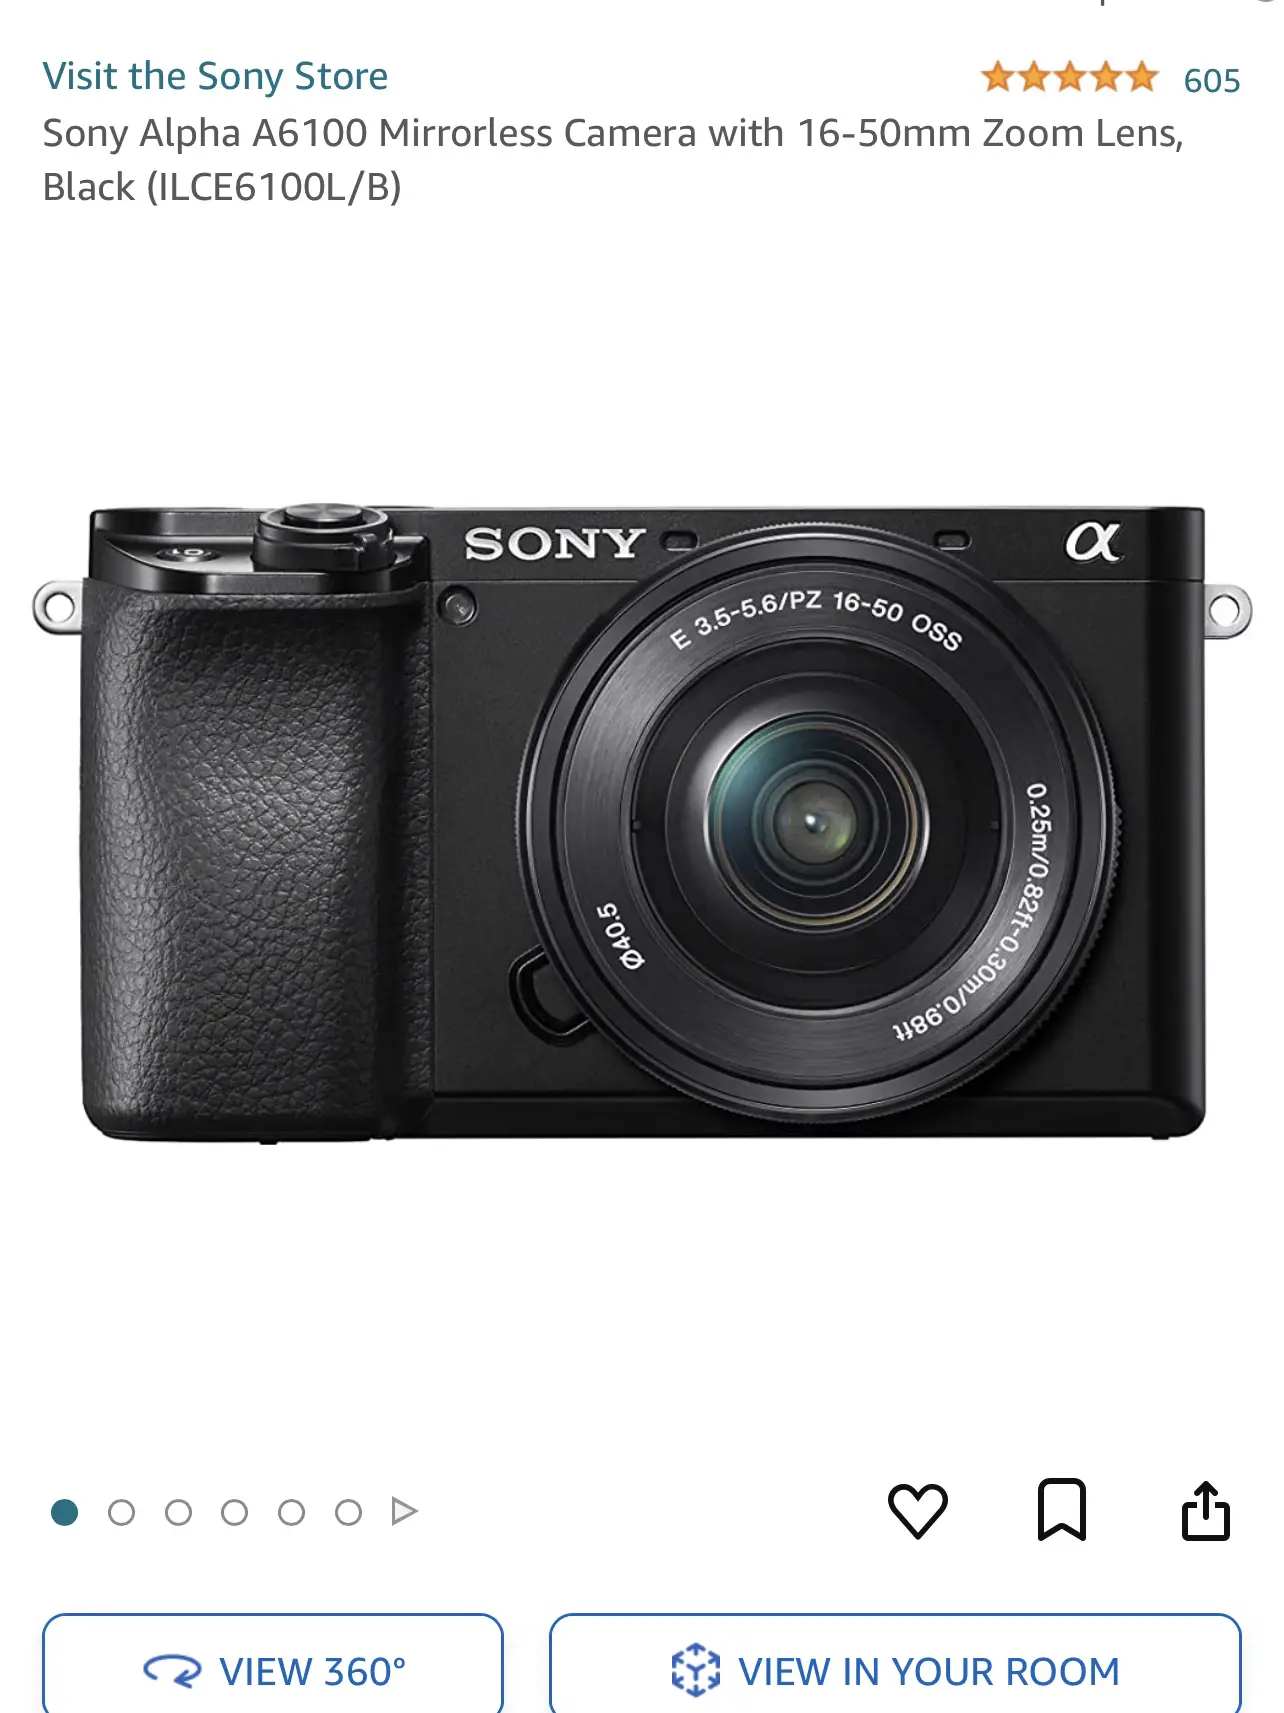 Sony Alpha a6100 Mirrorless Camera with 16-50mm Lens ILCE6100L/B